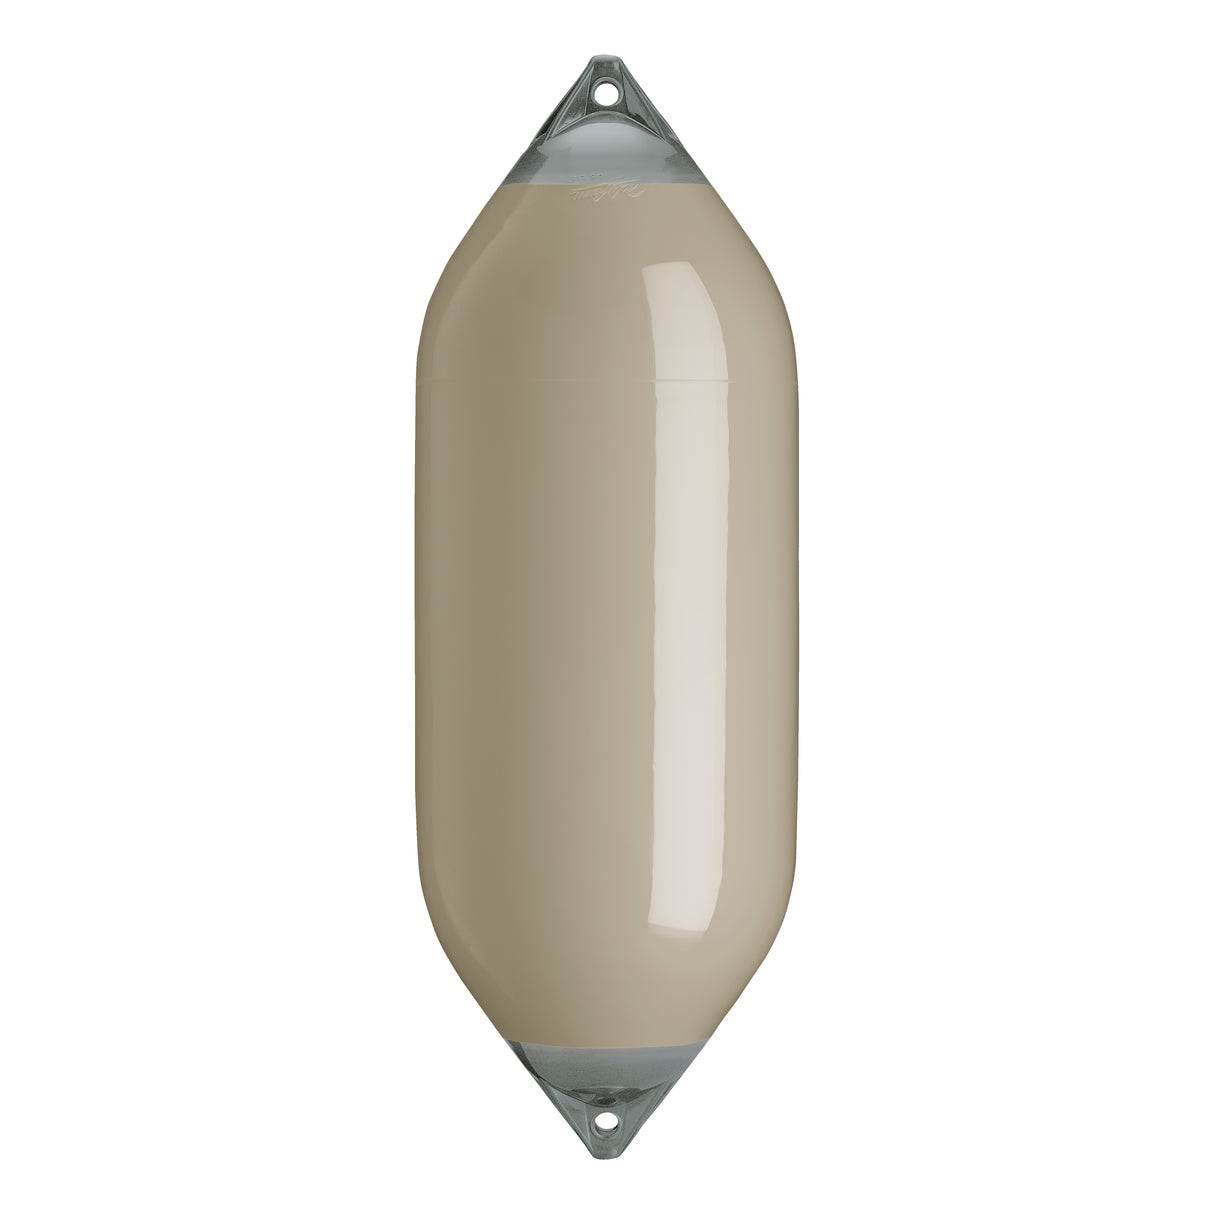 Sand boat fender with Grey-Top, Polyform F-10